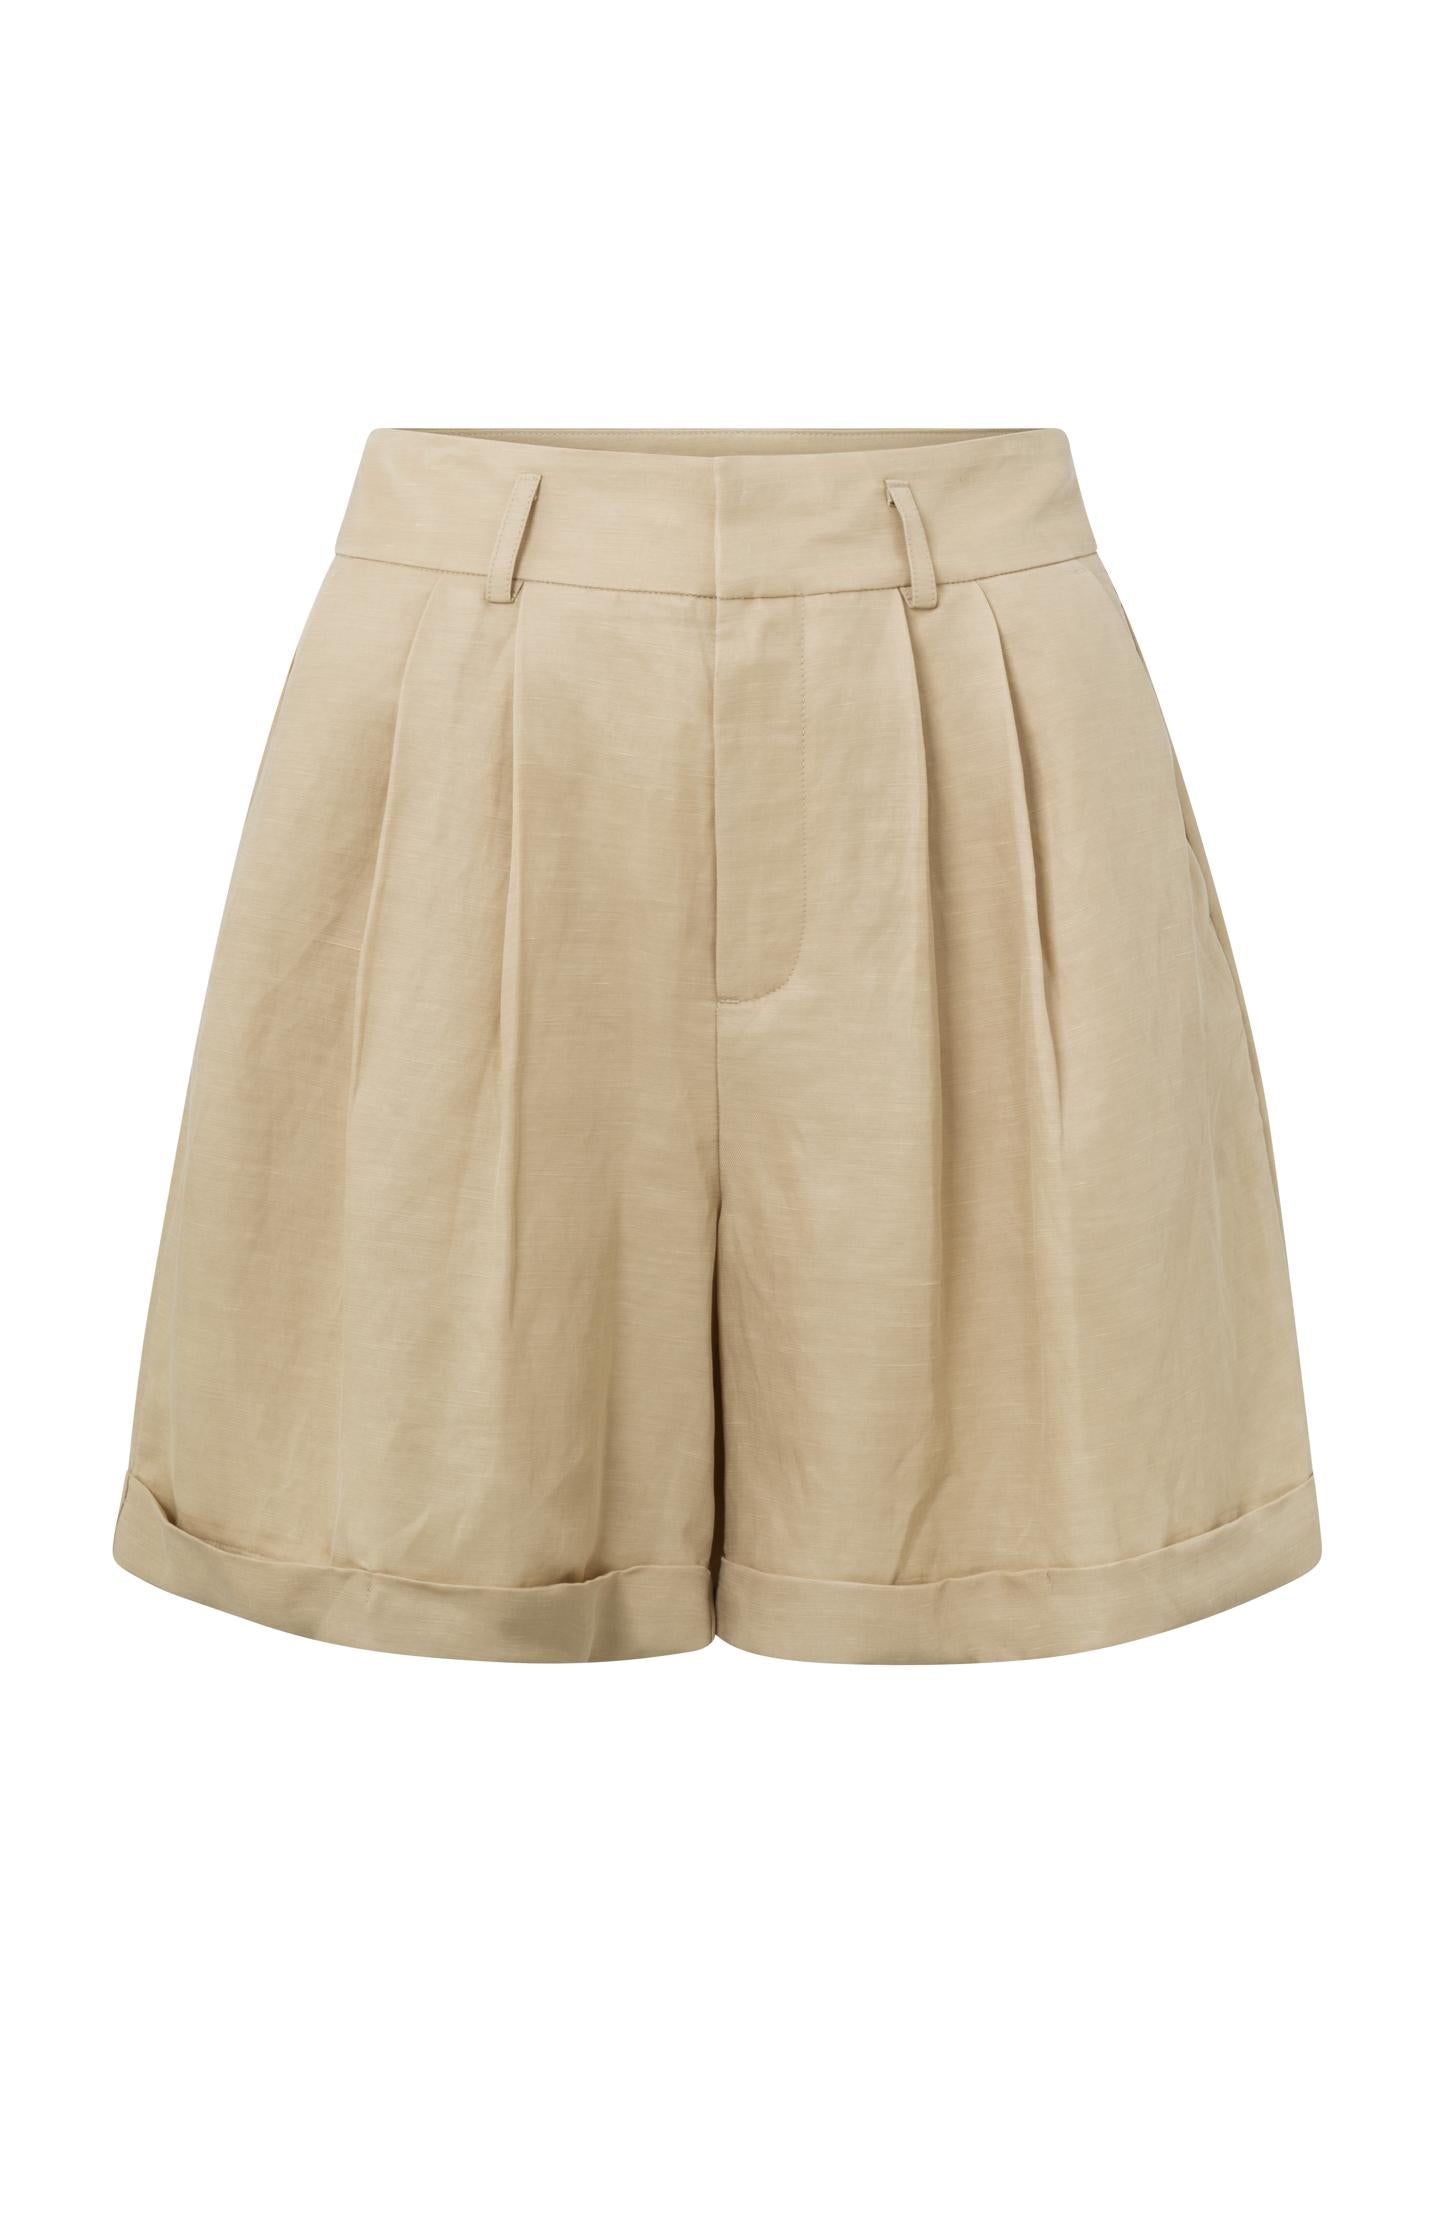 Woven short with high waist, pockets and pleated details - Type: product